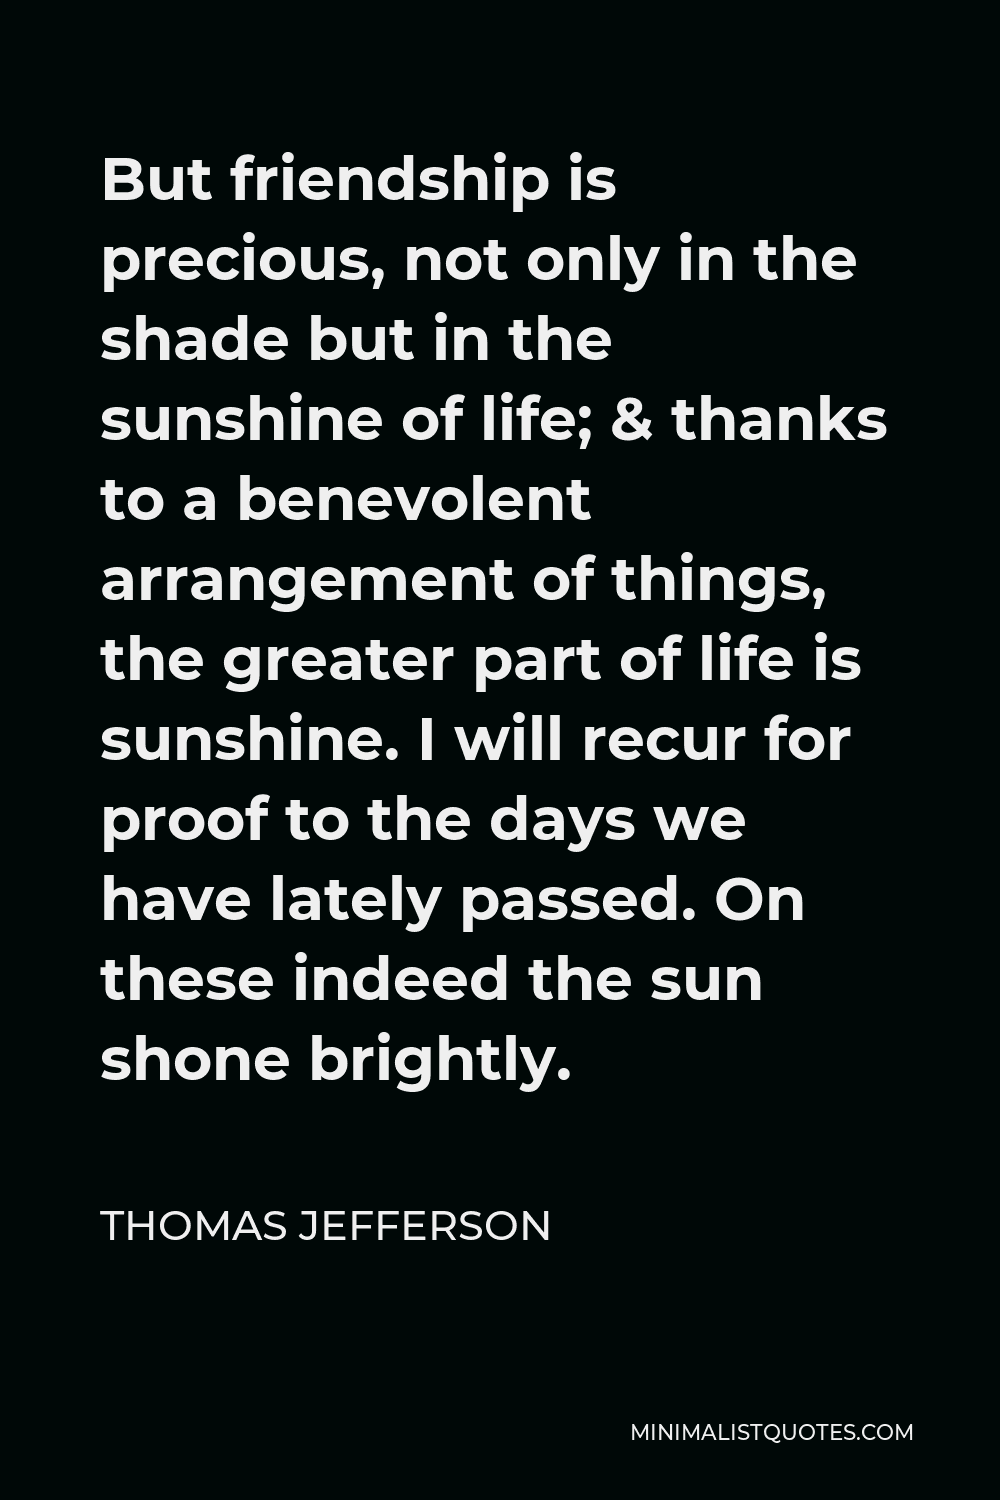 Thomas Jefferson Quote - But friendship is precious, not only in the shade but in the sunshine of life; & thanks to a benevolent arrangement of things, the greater part of life is sunshine. I will recur for proof to the days we have lately passed. On these indeed the sun shone brightly.